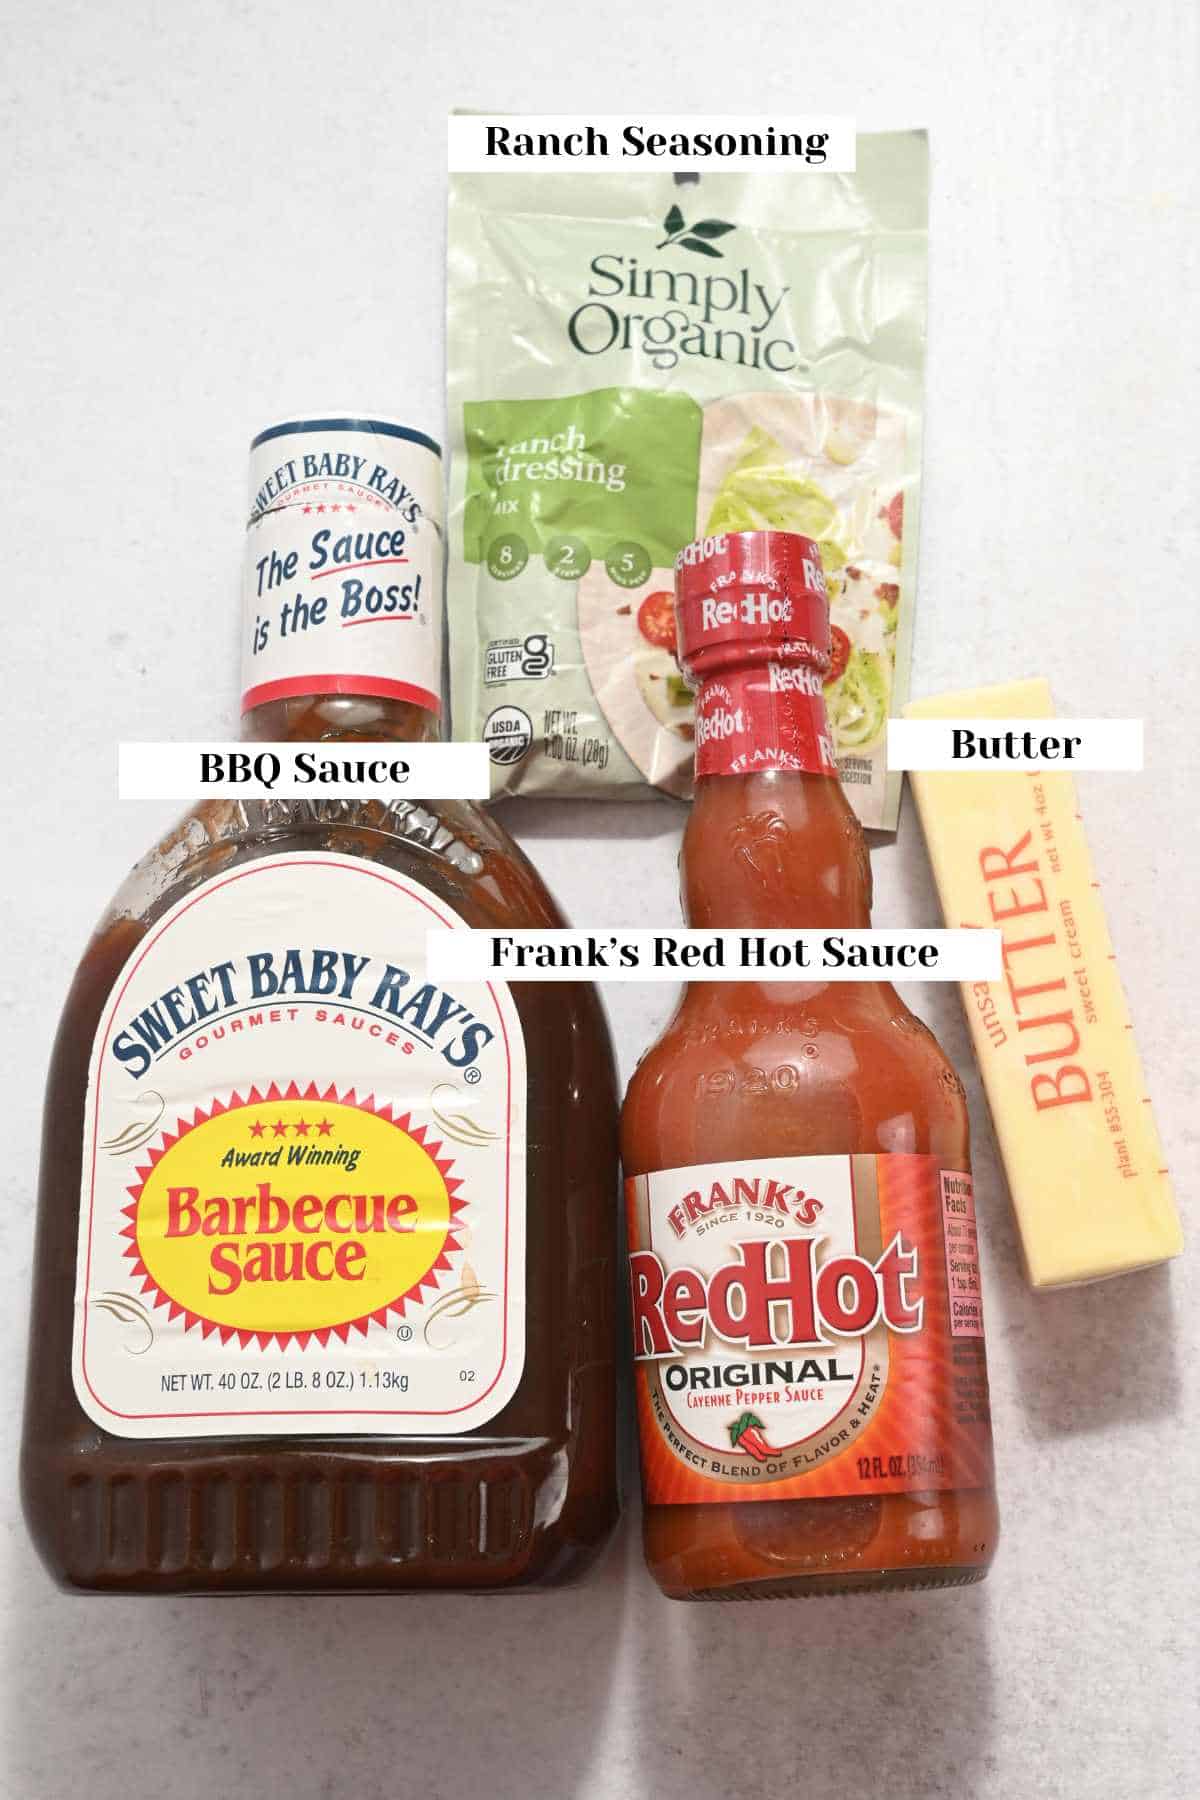 labeled ingredients for making Frank's Red Hot homemade wing sauce.